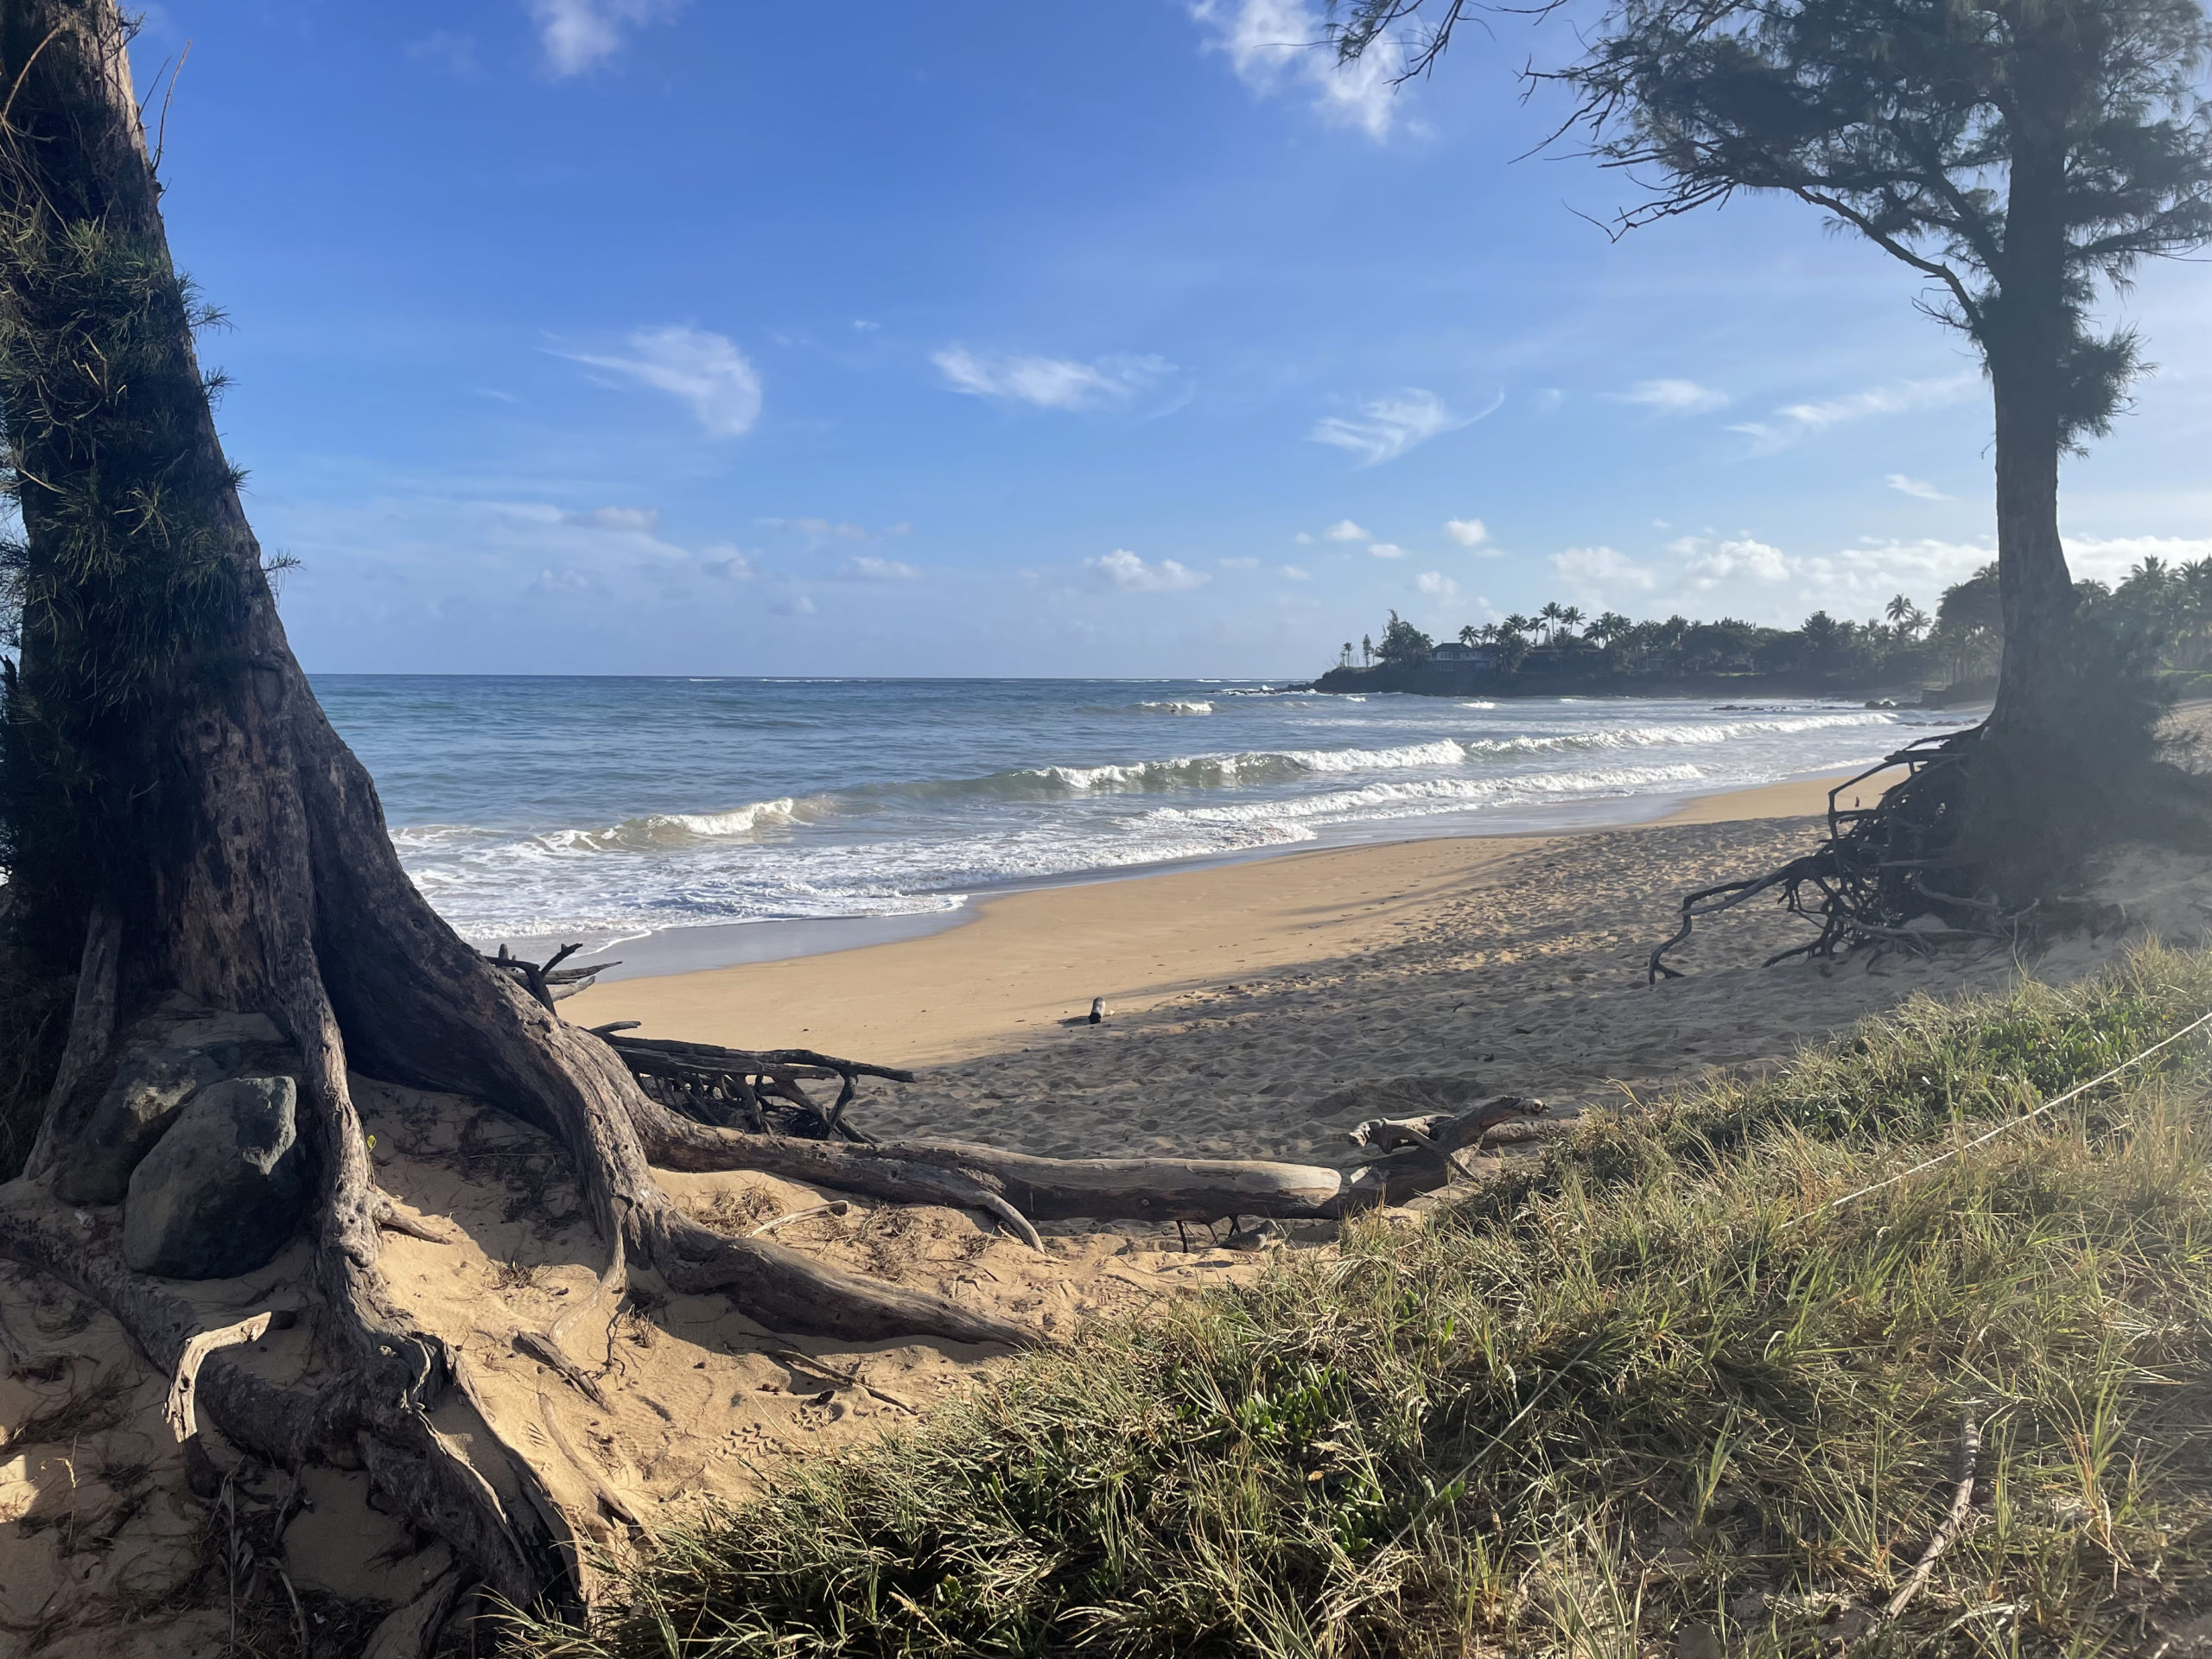 Paia Bay, North Shore Maui. Travel Pono, Stay Out Of Closed Areas